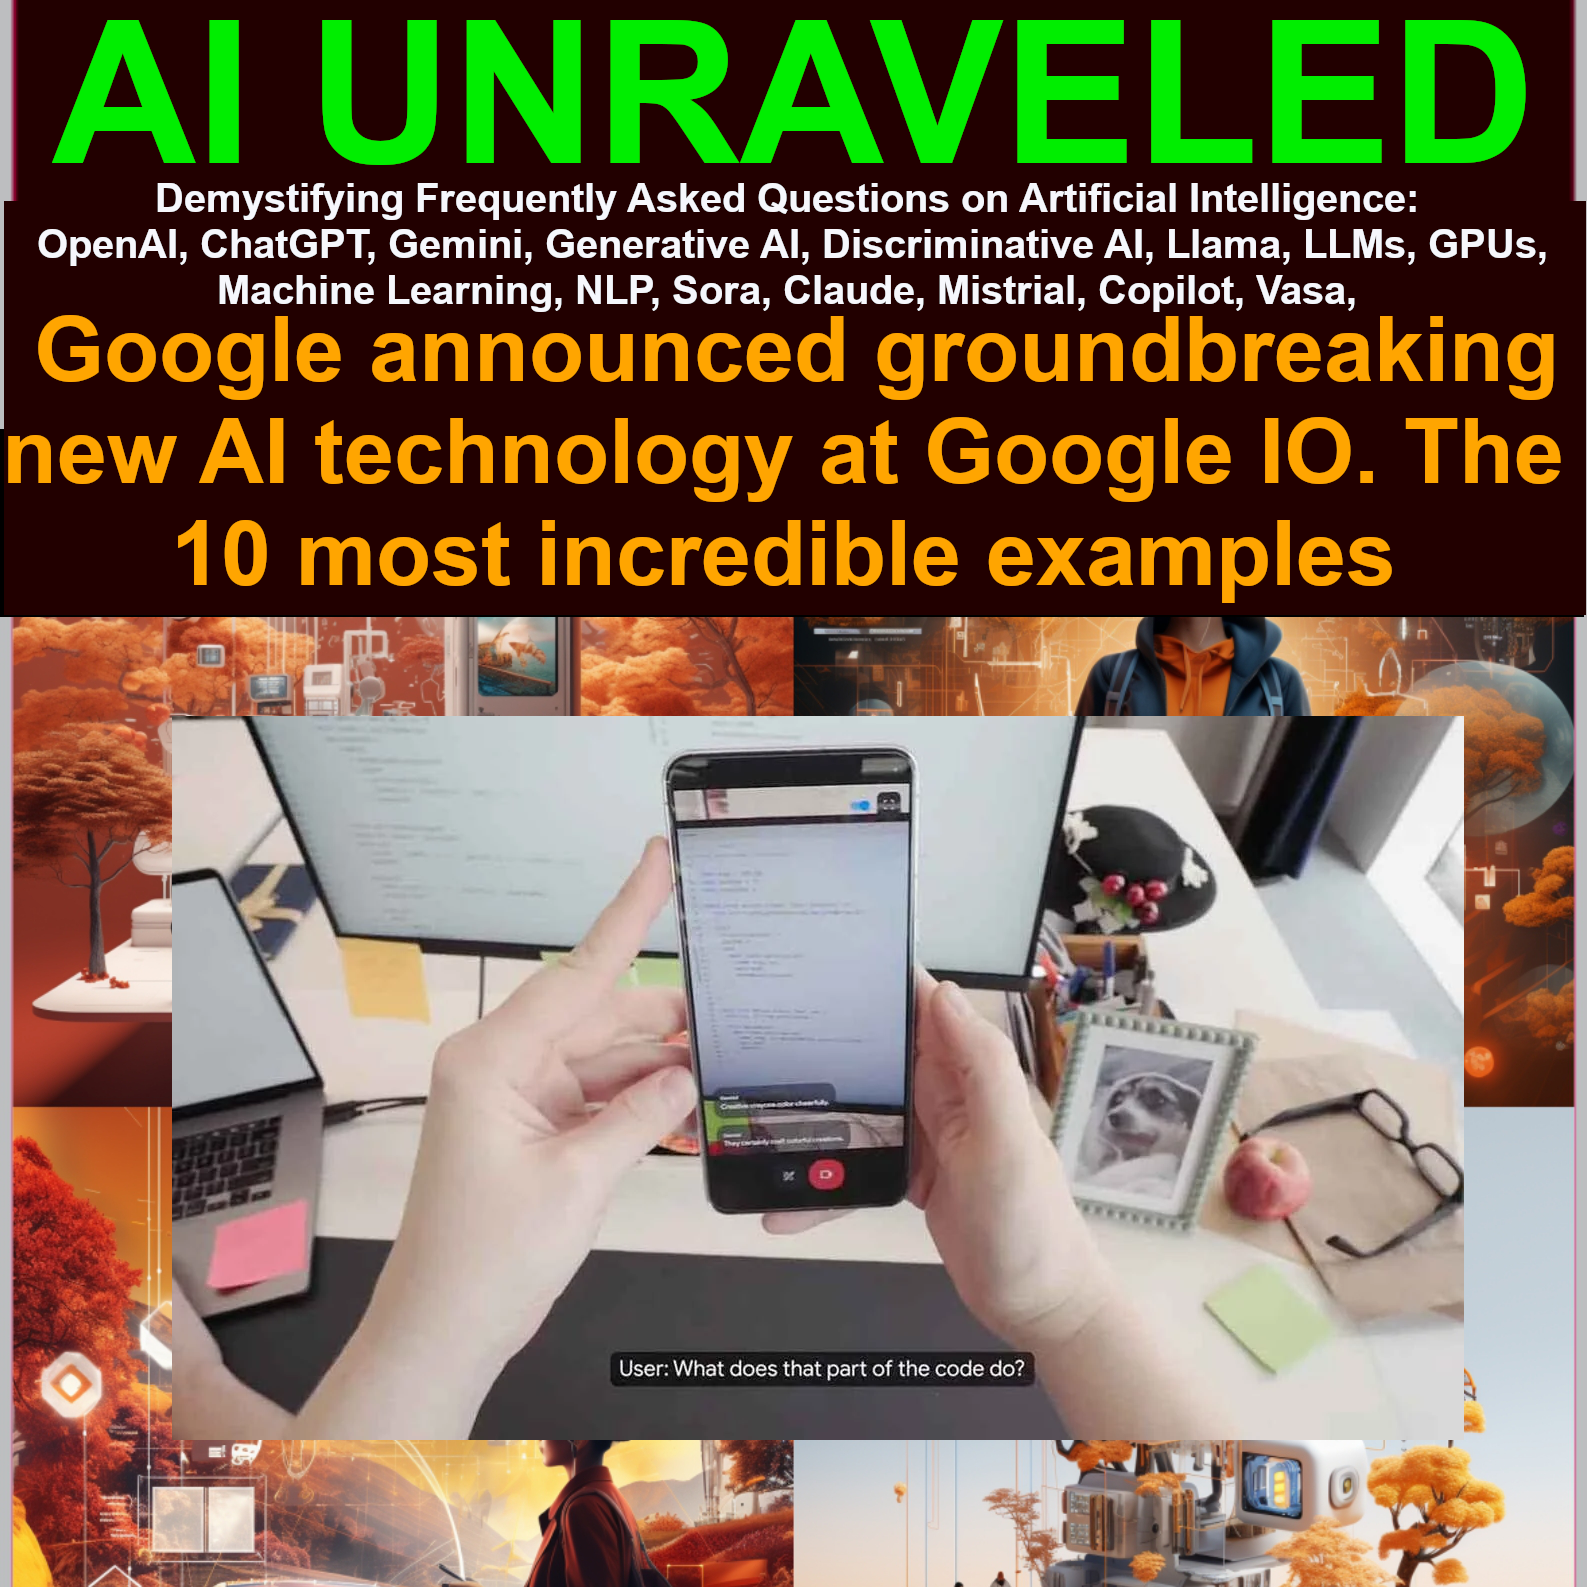 Google announced groundbreaking new AI technology at Google IO. The 10 most incredible examples